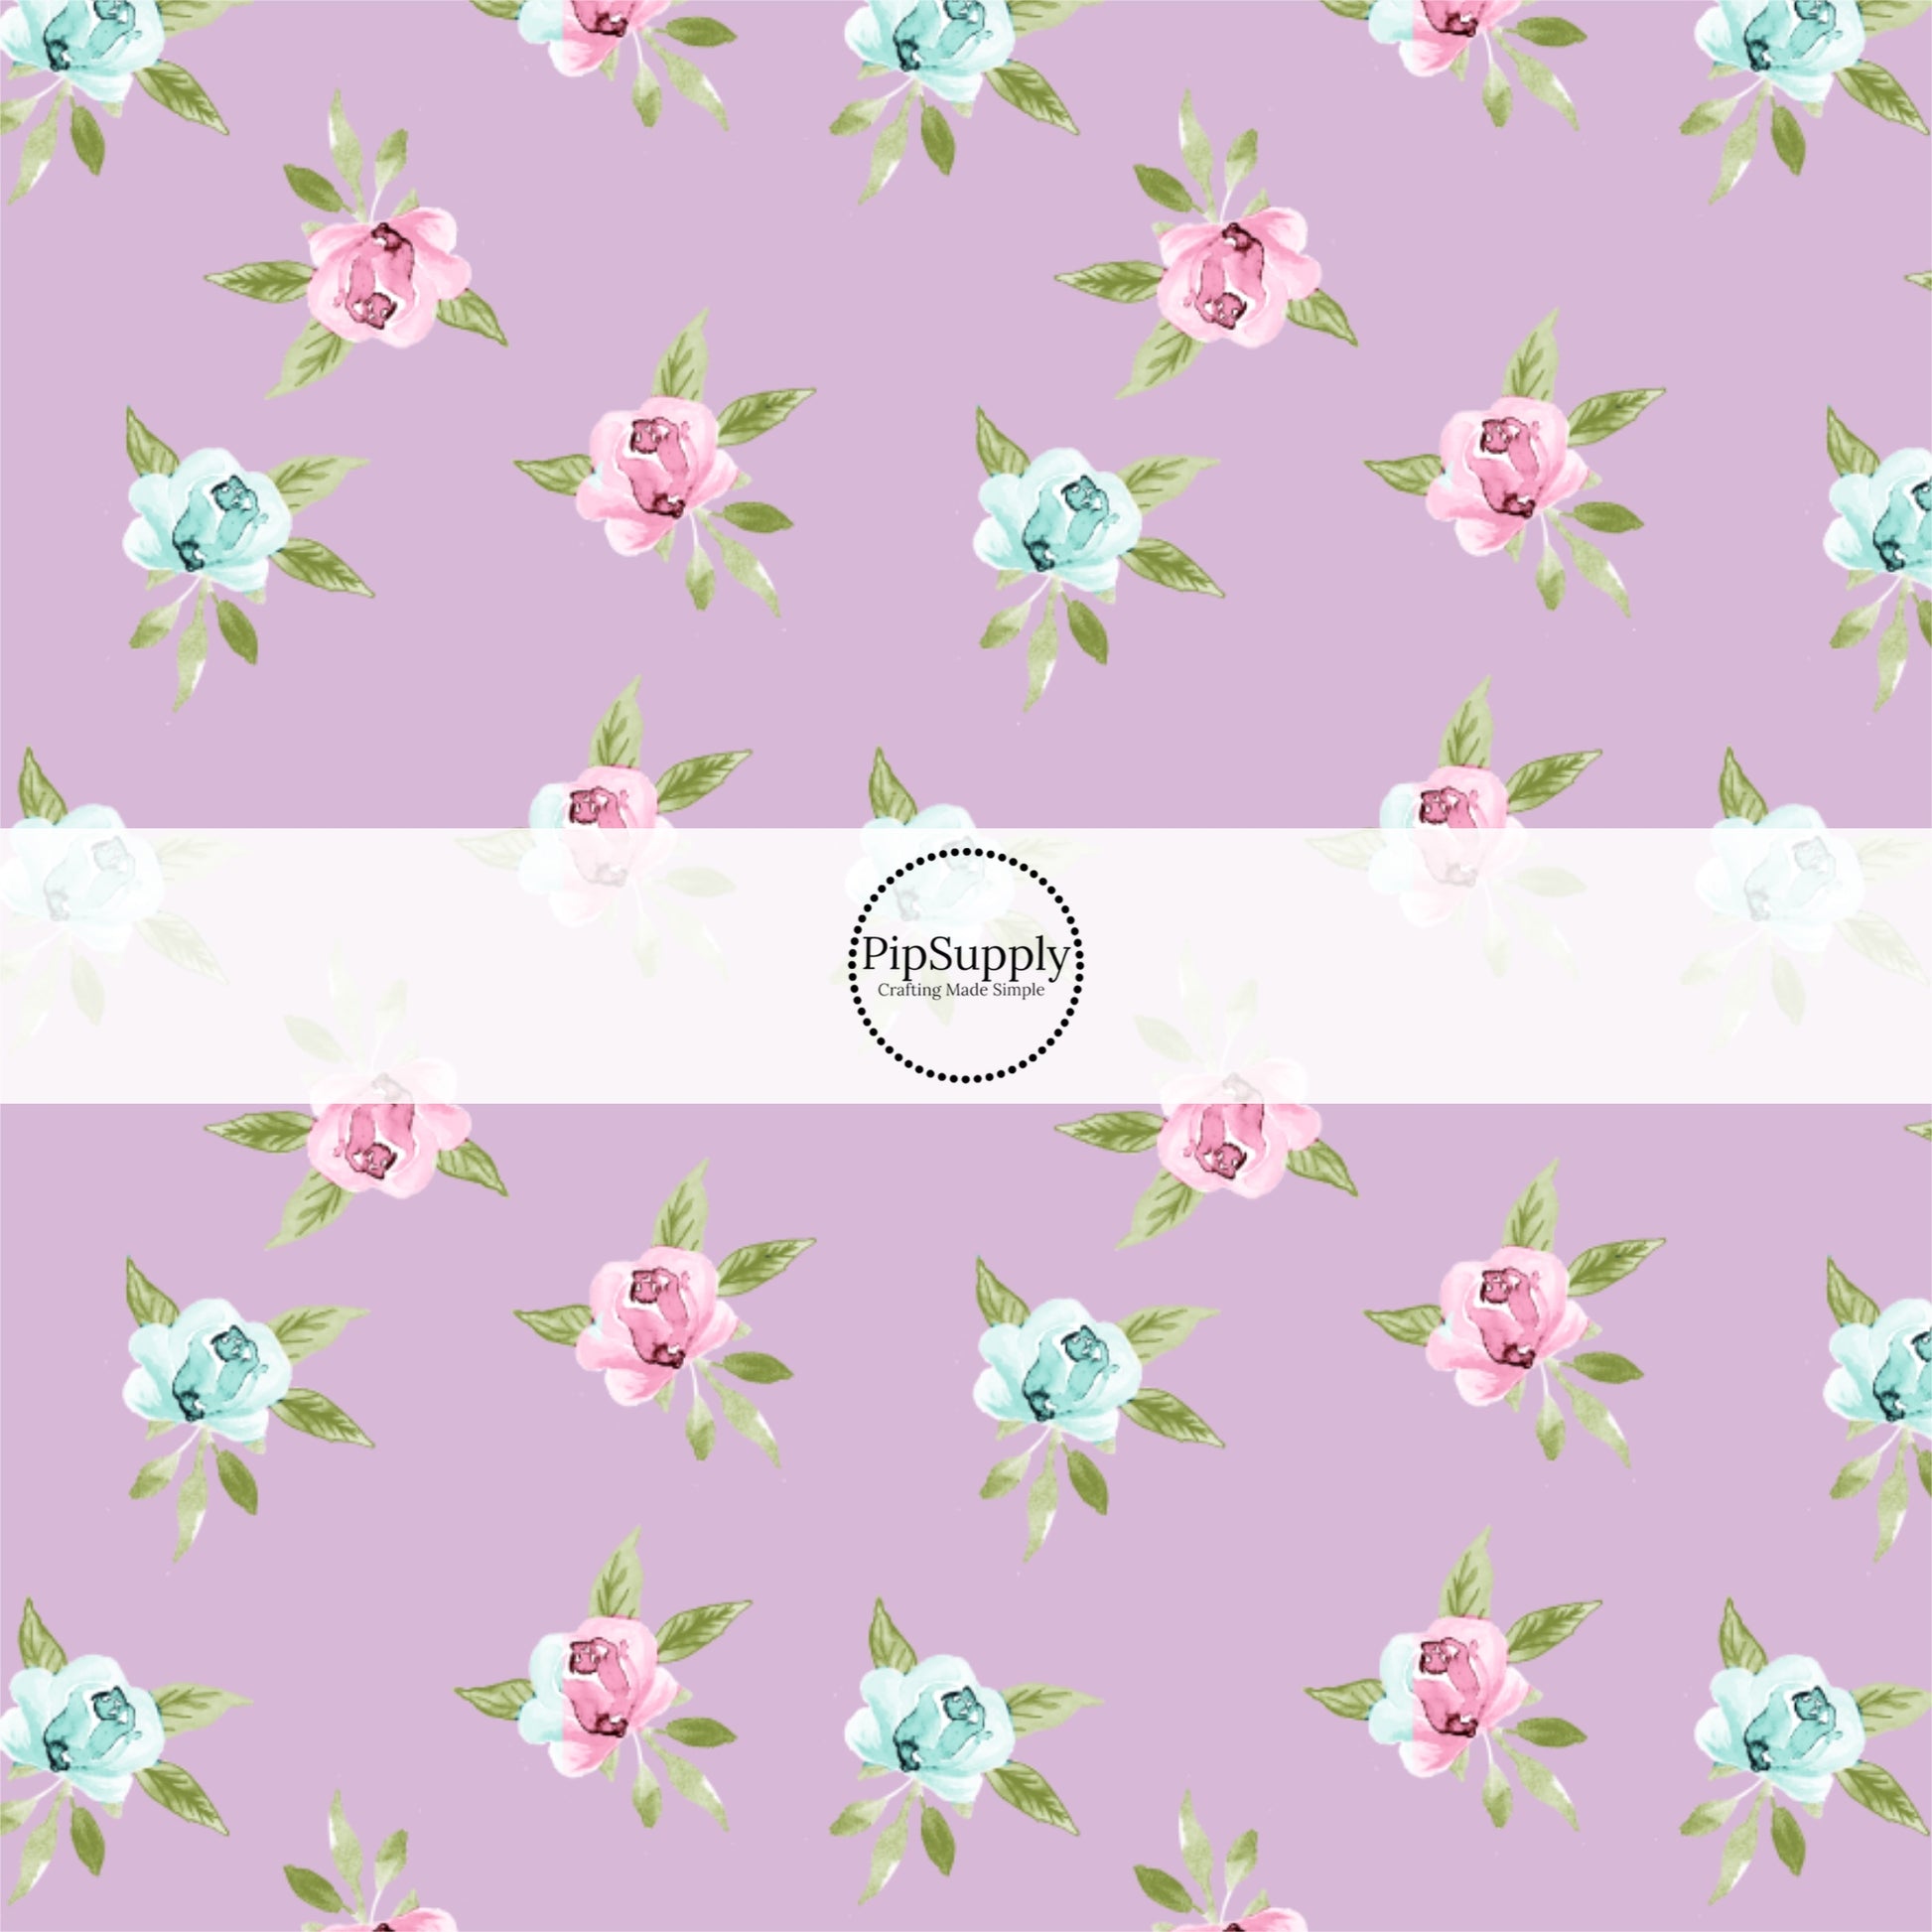 This summer fabric by the yard features pink and blue roses on purple. This fun summer themed fabric can be used for all your sewing and crafting needs!